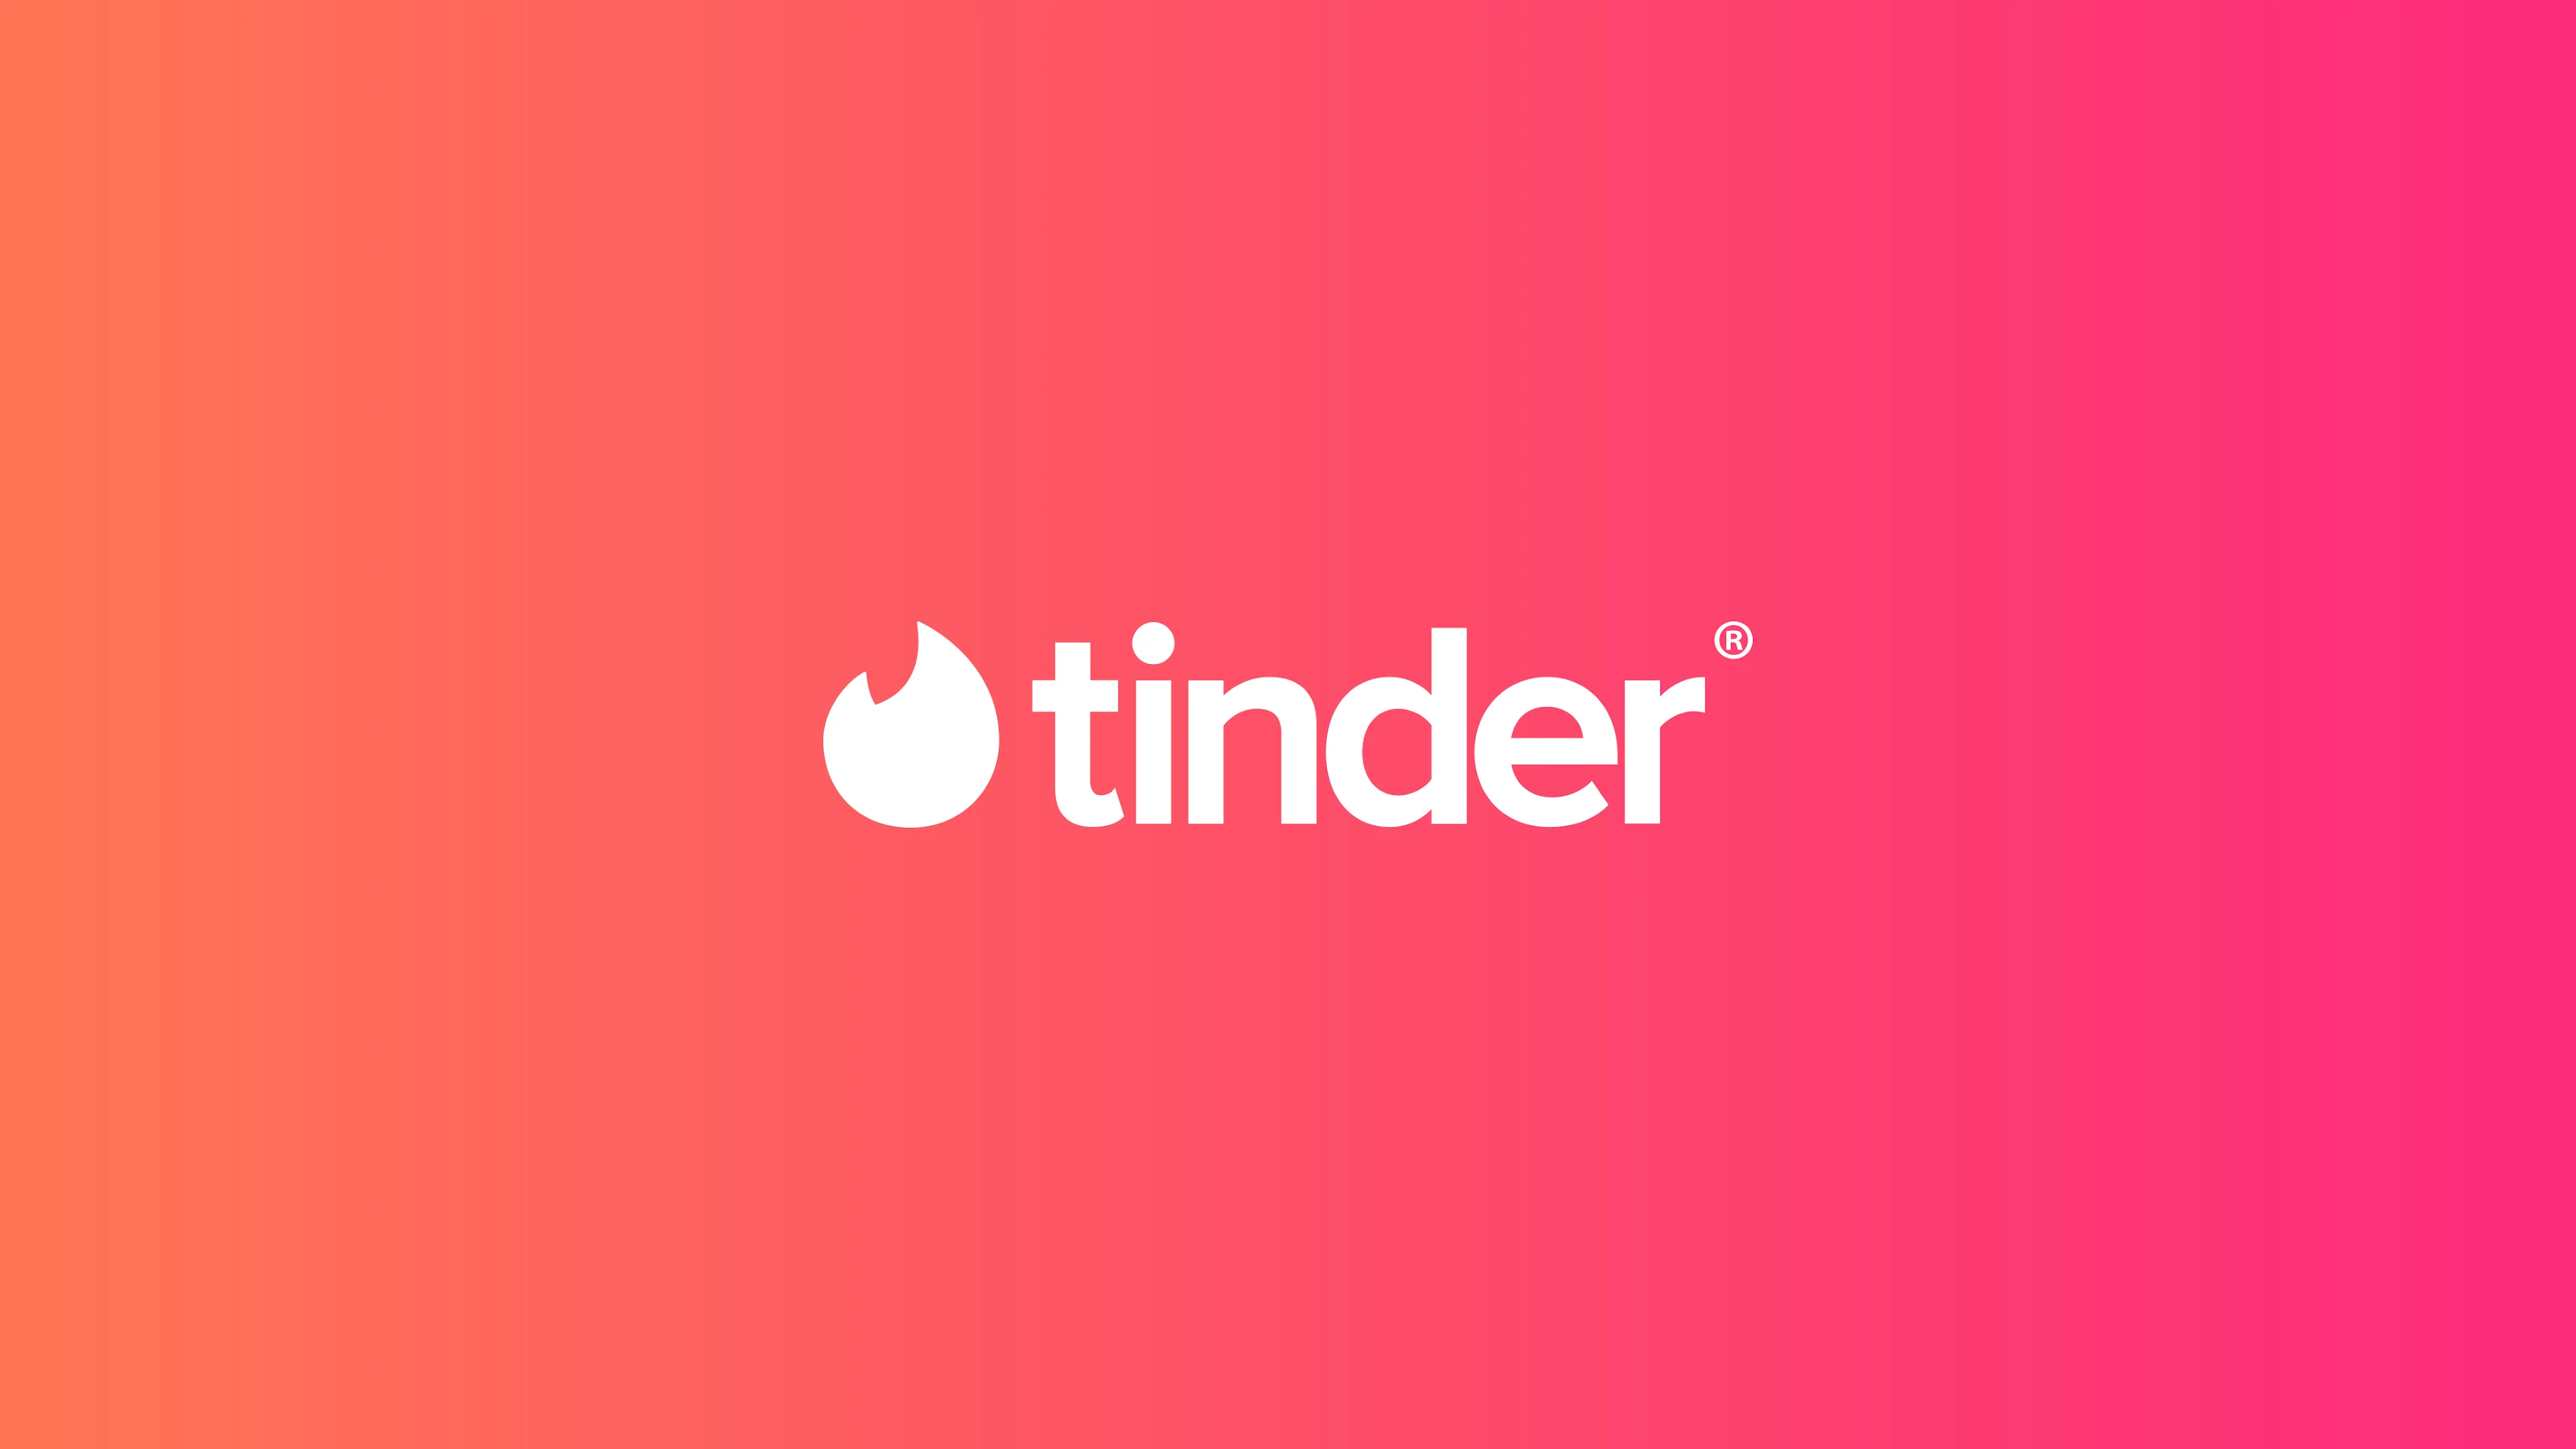 Android Apps by Tinder on Google Play